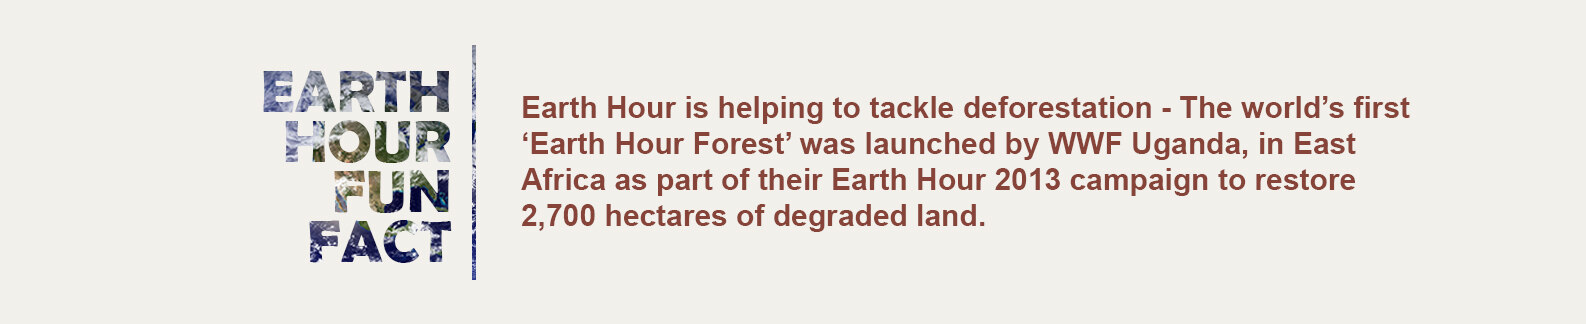 Earth Hour is helping to tackle deforestation - The world’s first ‘Earth Hour Forest’ was launched by WWF Uganda, in East Africa as part of their Earth Hour 2013 campaign to restore 2,700 hectares of degraded land.